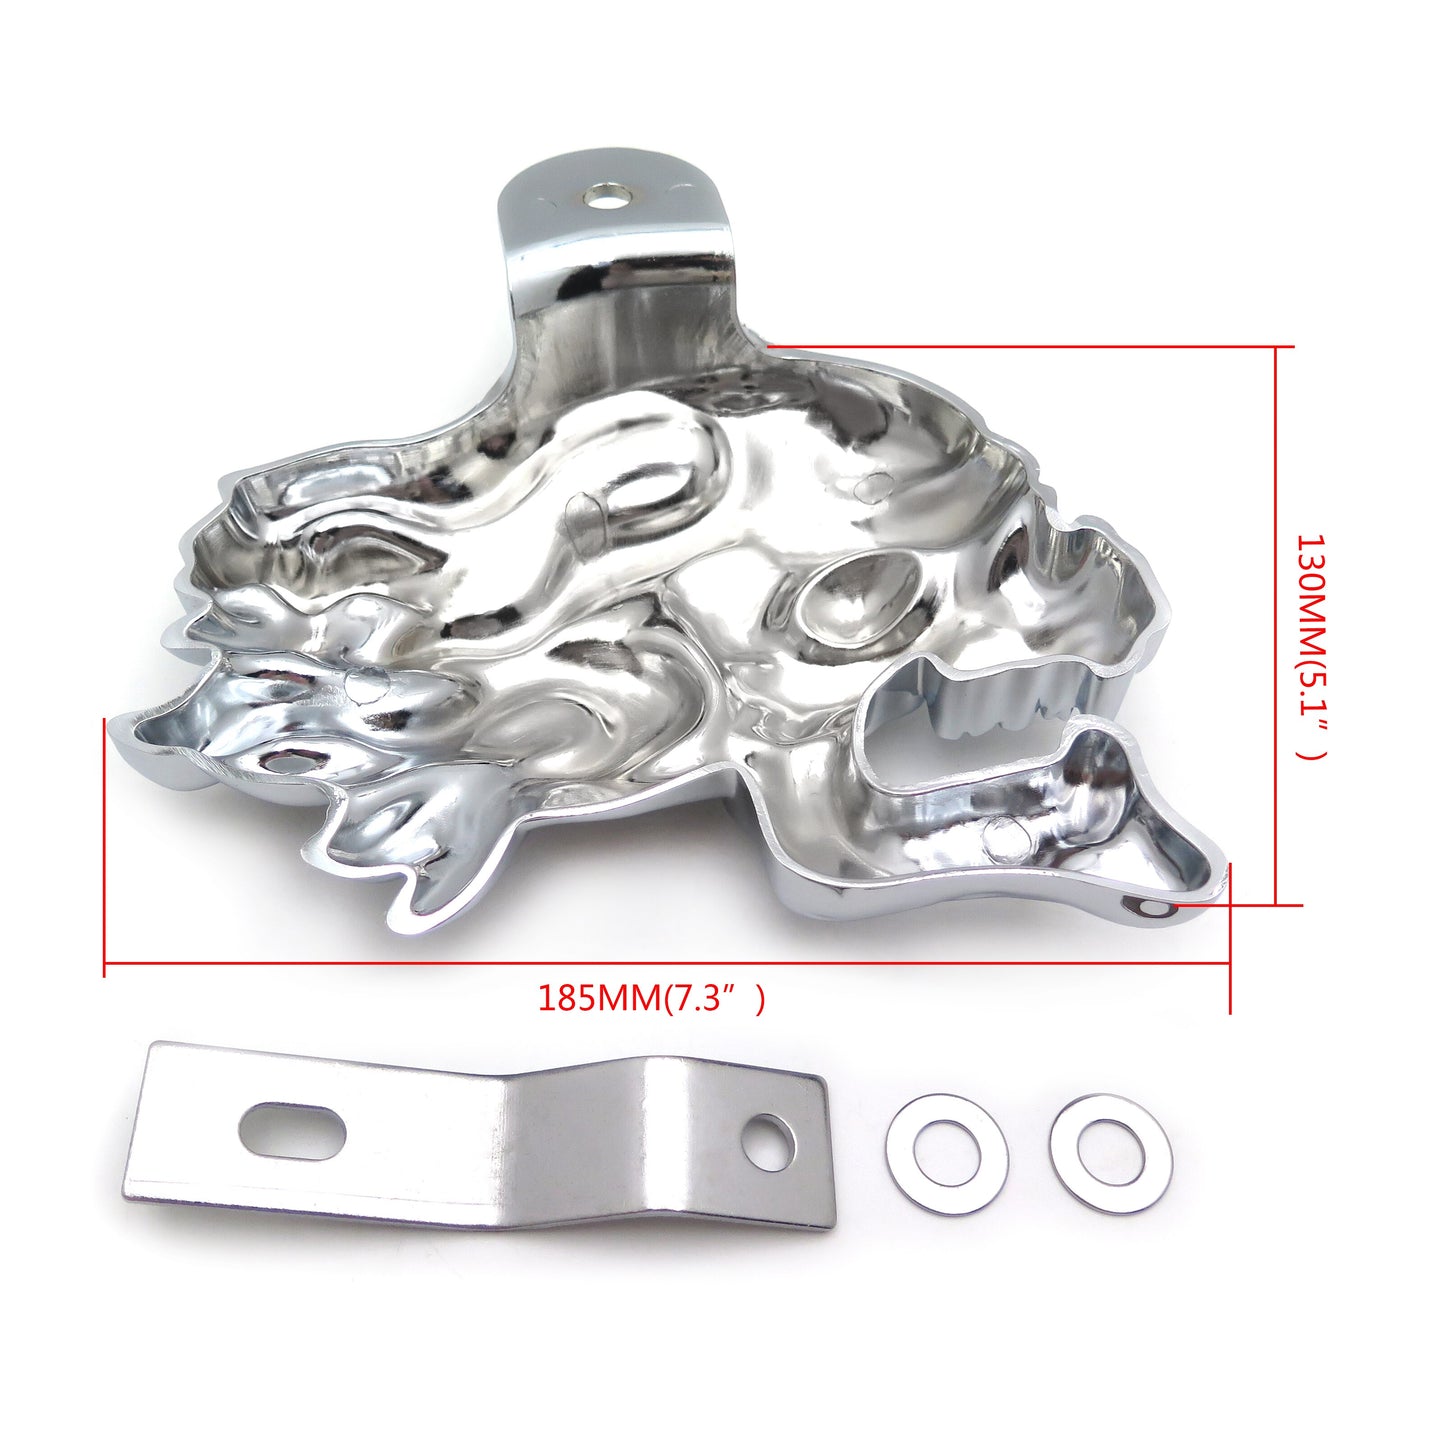 Motorcycle Parts Horn Cover for 1992 and up Harley-Davidson with side mount all V-rod's Chrome